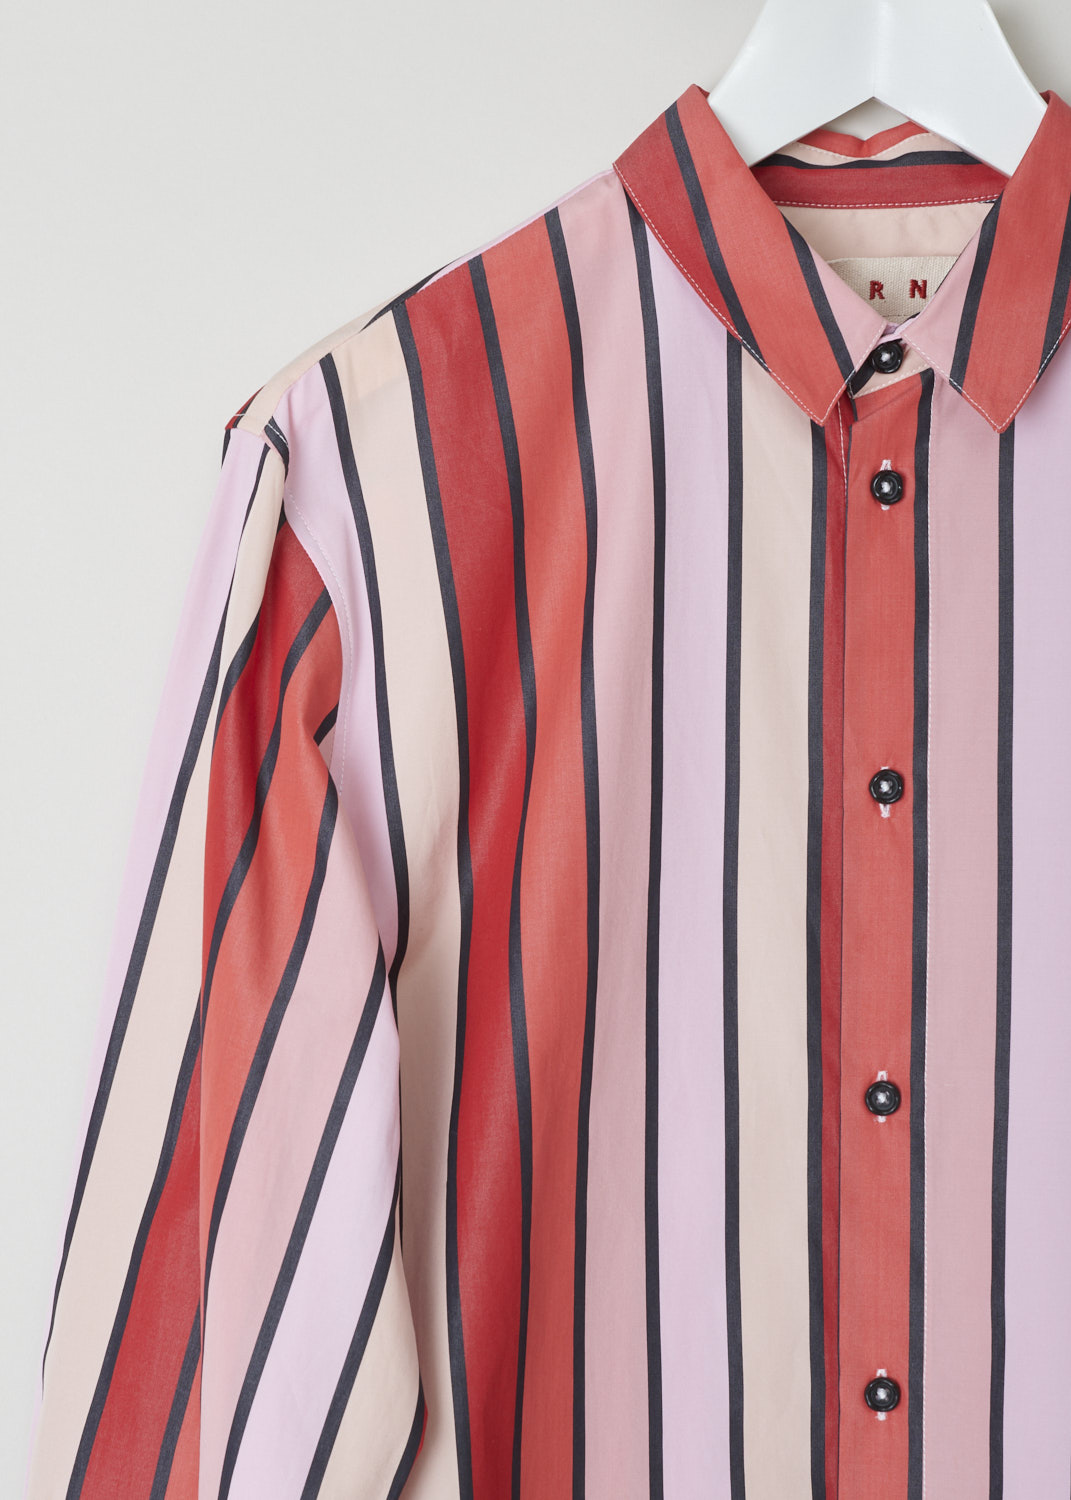 Marni, Multicolour striped blouse, CAMA0403A0_TCZ52_STR69, red pink beige black print, detail, Made in the classic blouse model featuring a pointed collar, long cuffed sleeves and a button fastening on the front. What makes this model stand out so much is the cheerful coloured print, where strokes of red, pink, beige and black alternate each other.